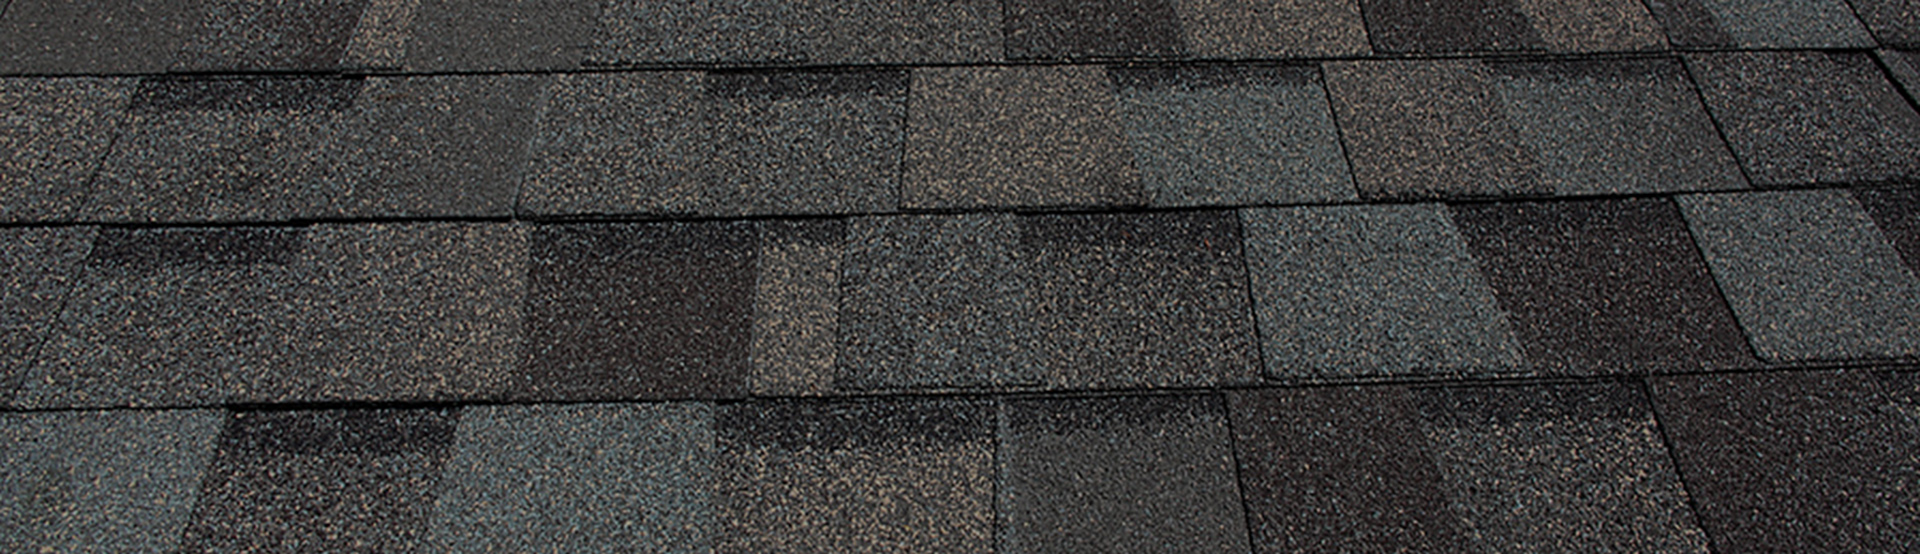 Roof de-icing - heat roof with shingles banner